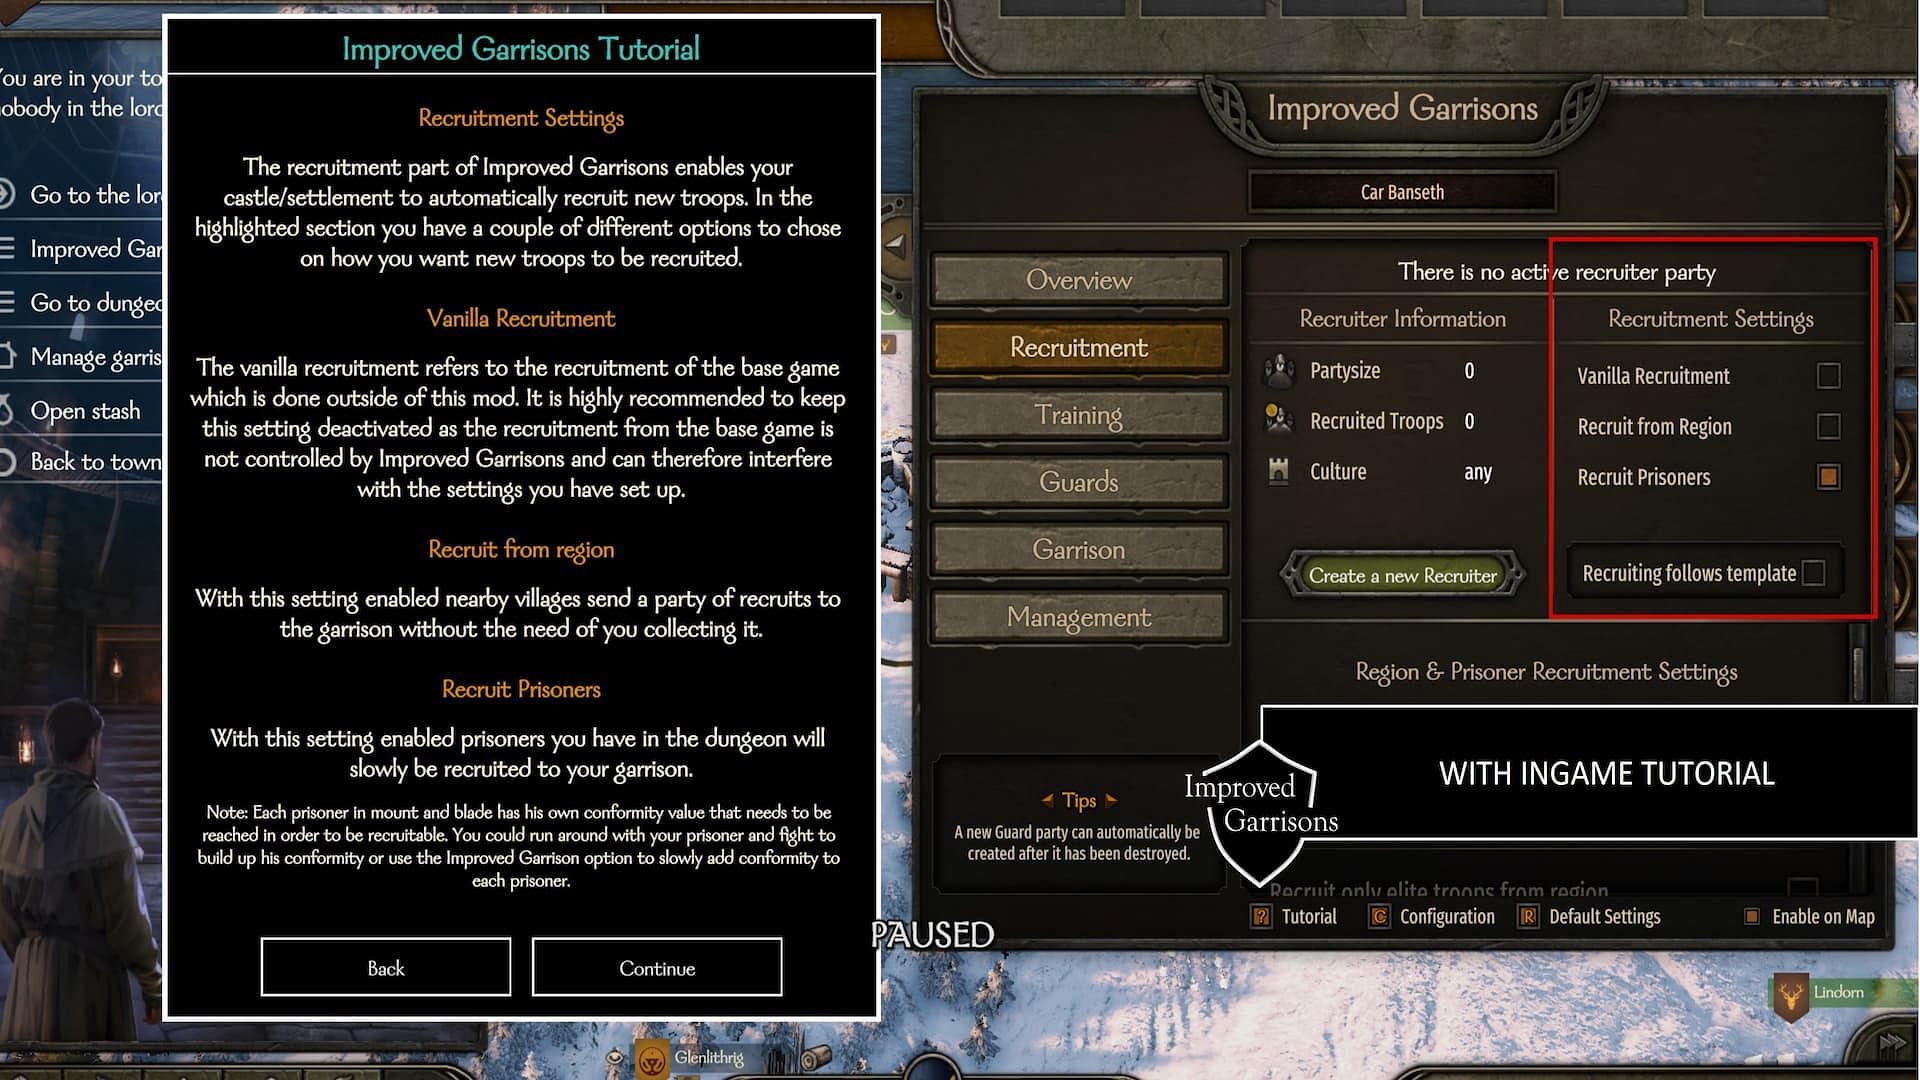 Improved Garrisons is a great mod for those that like to recruit (Image via Nexus Mods website)